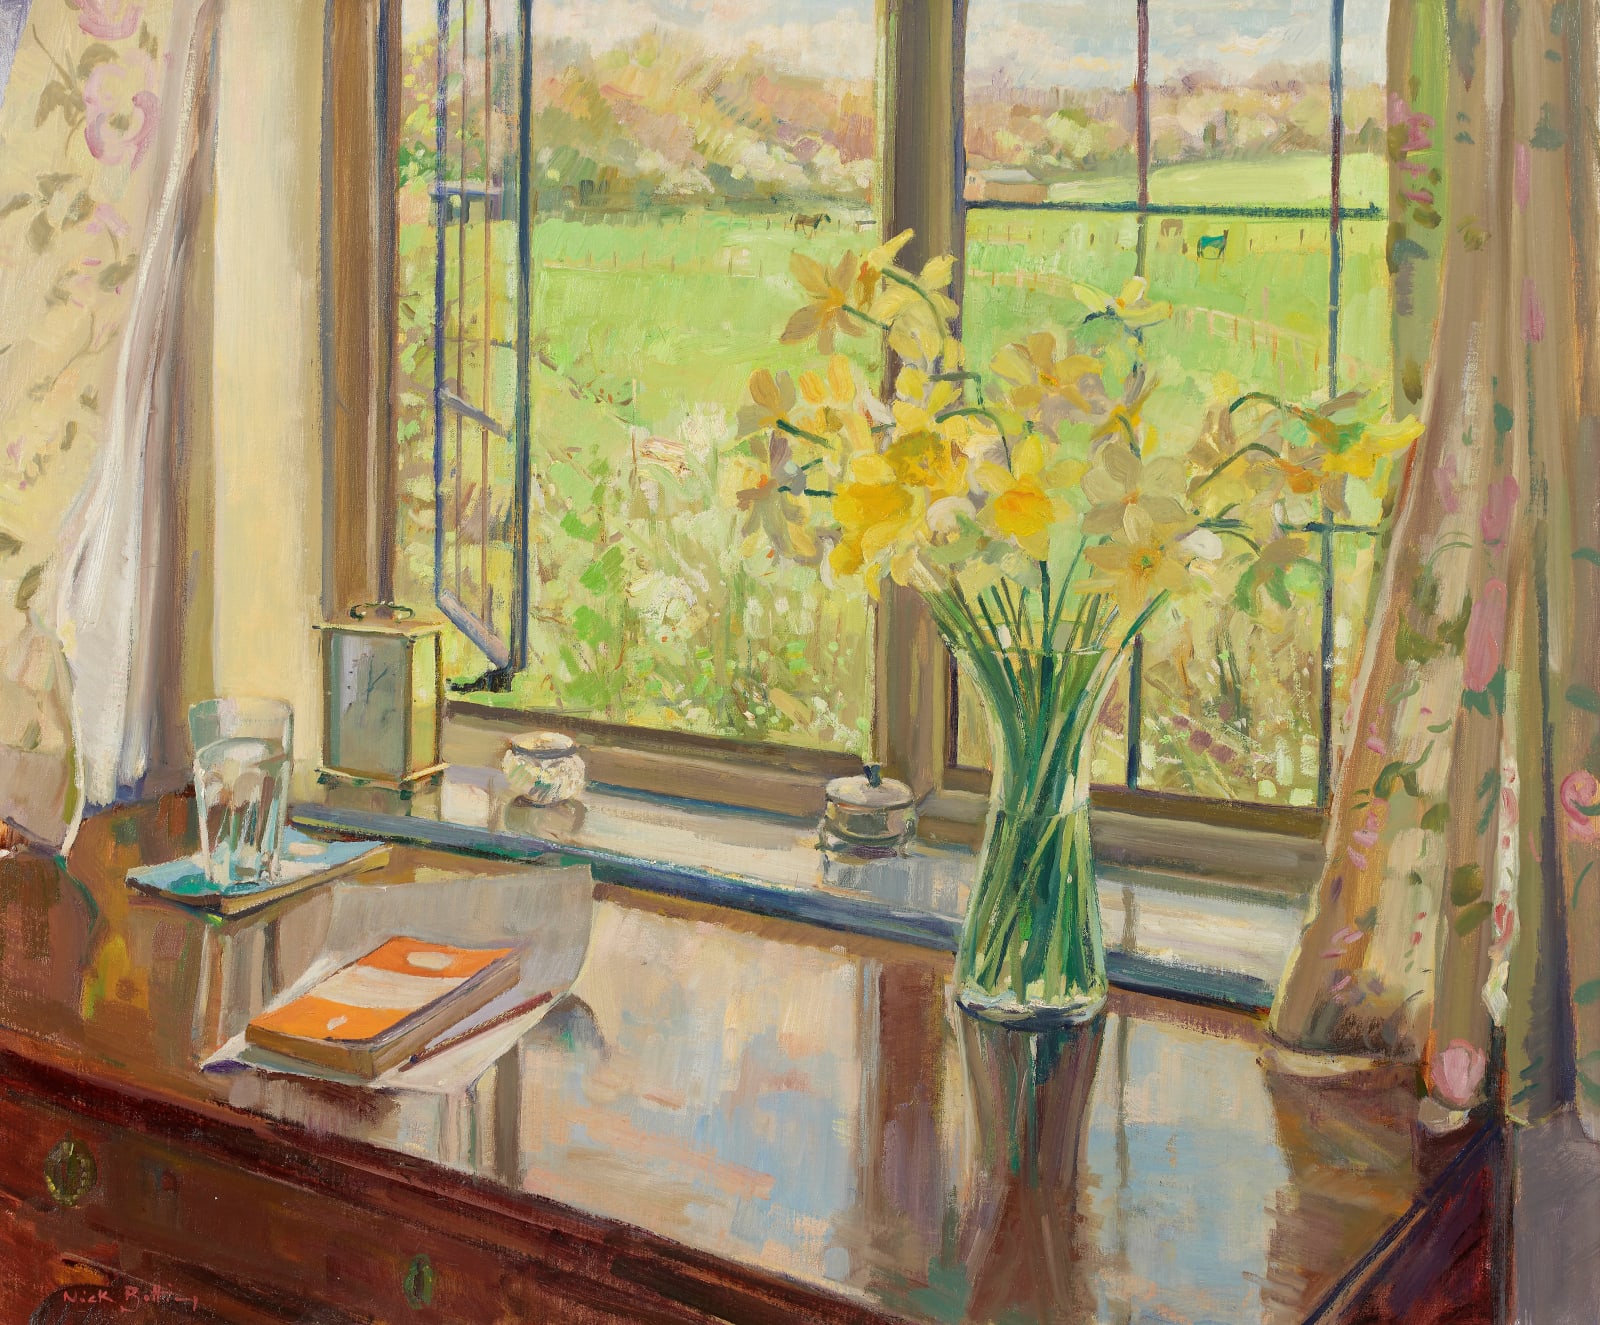 Nick Botting, Countryside Still Life with Daffodils